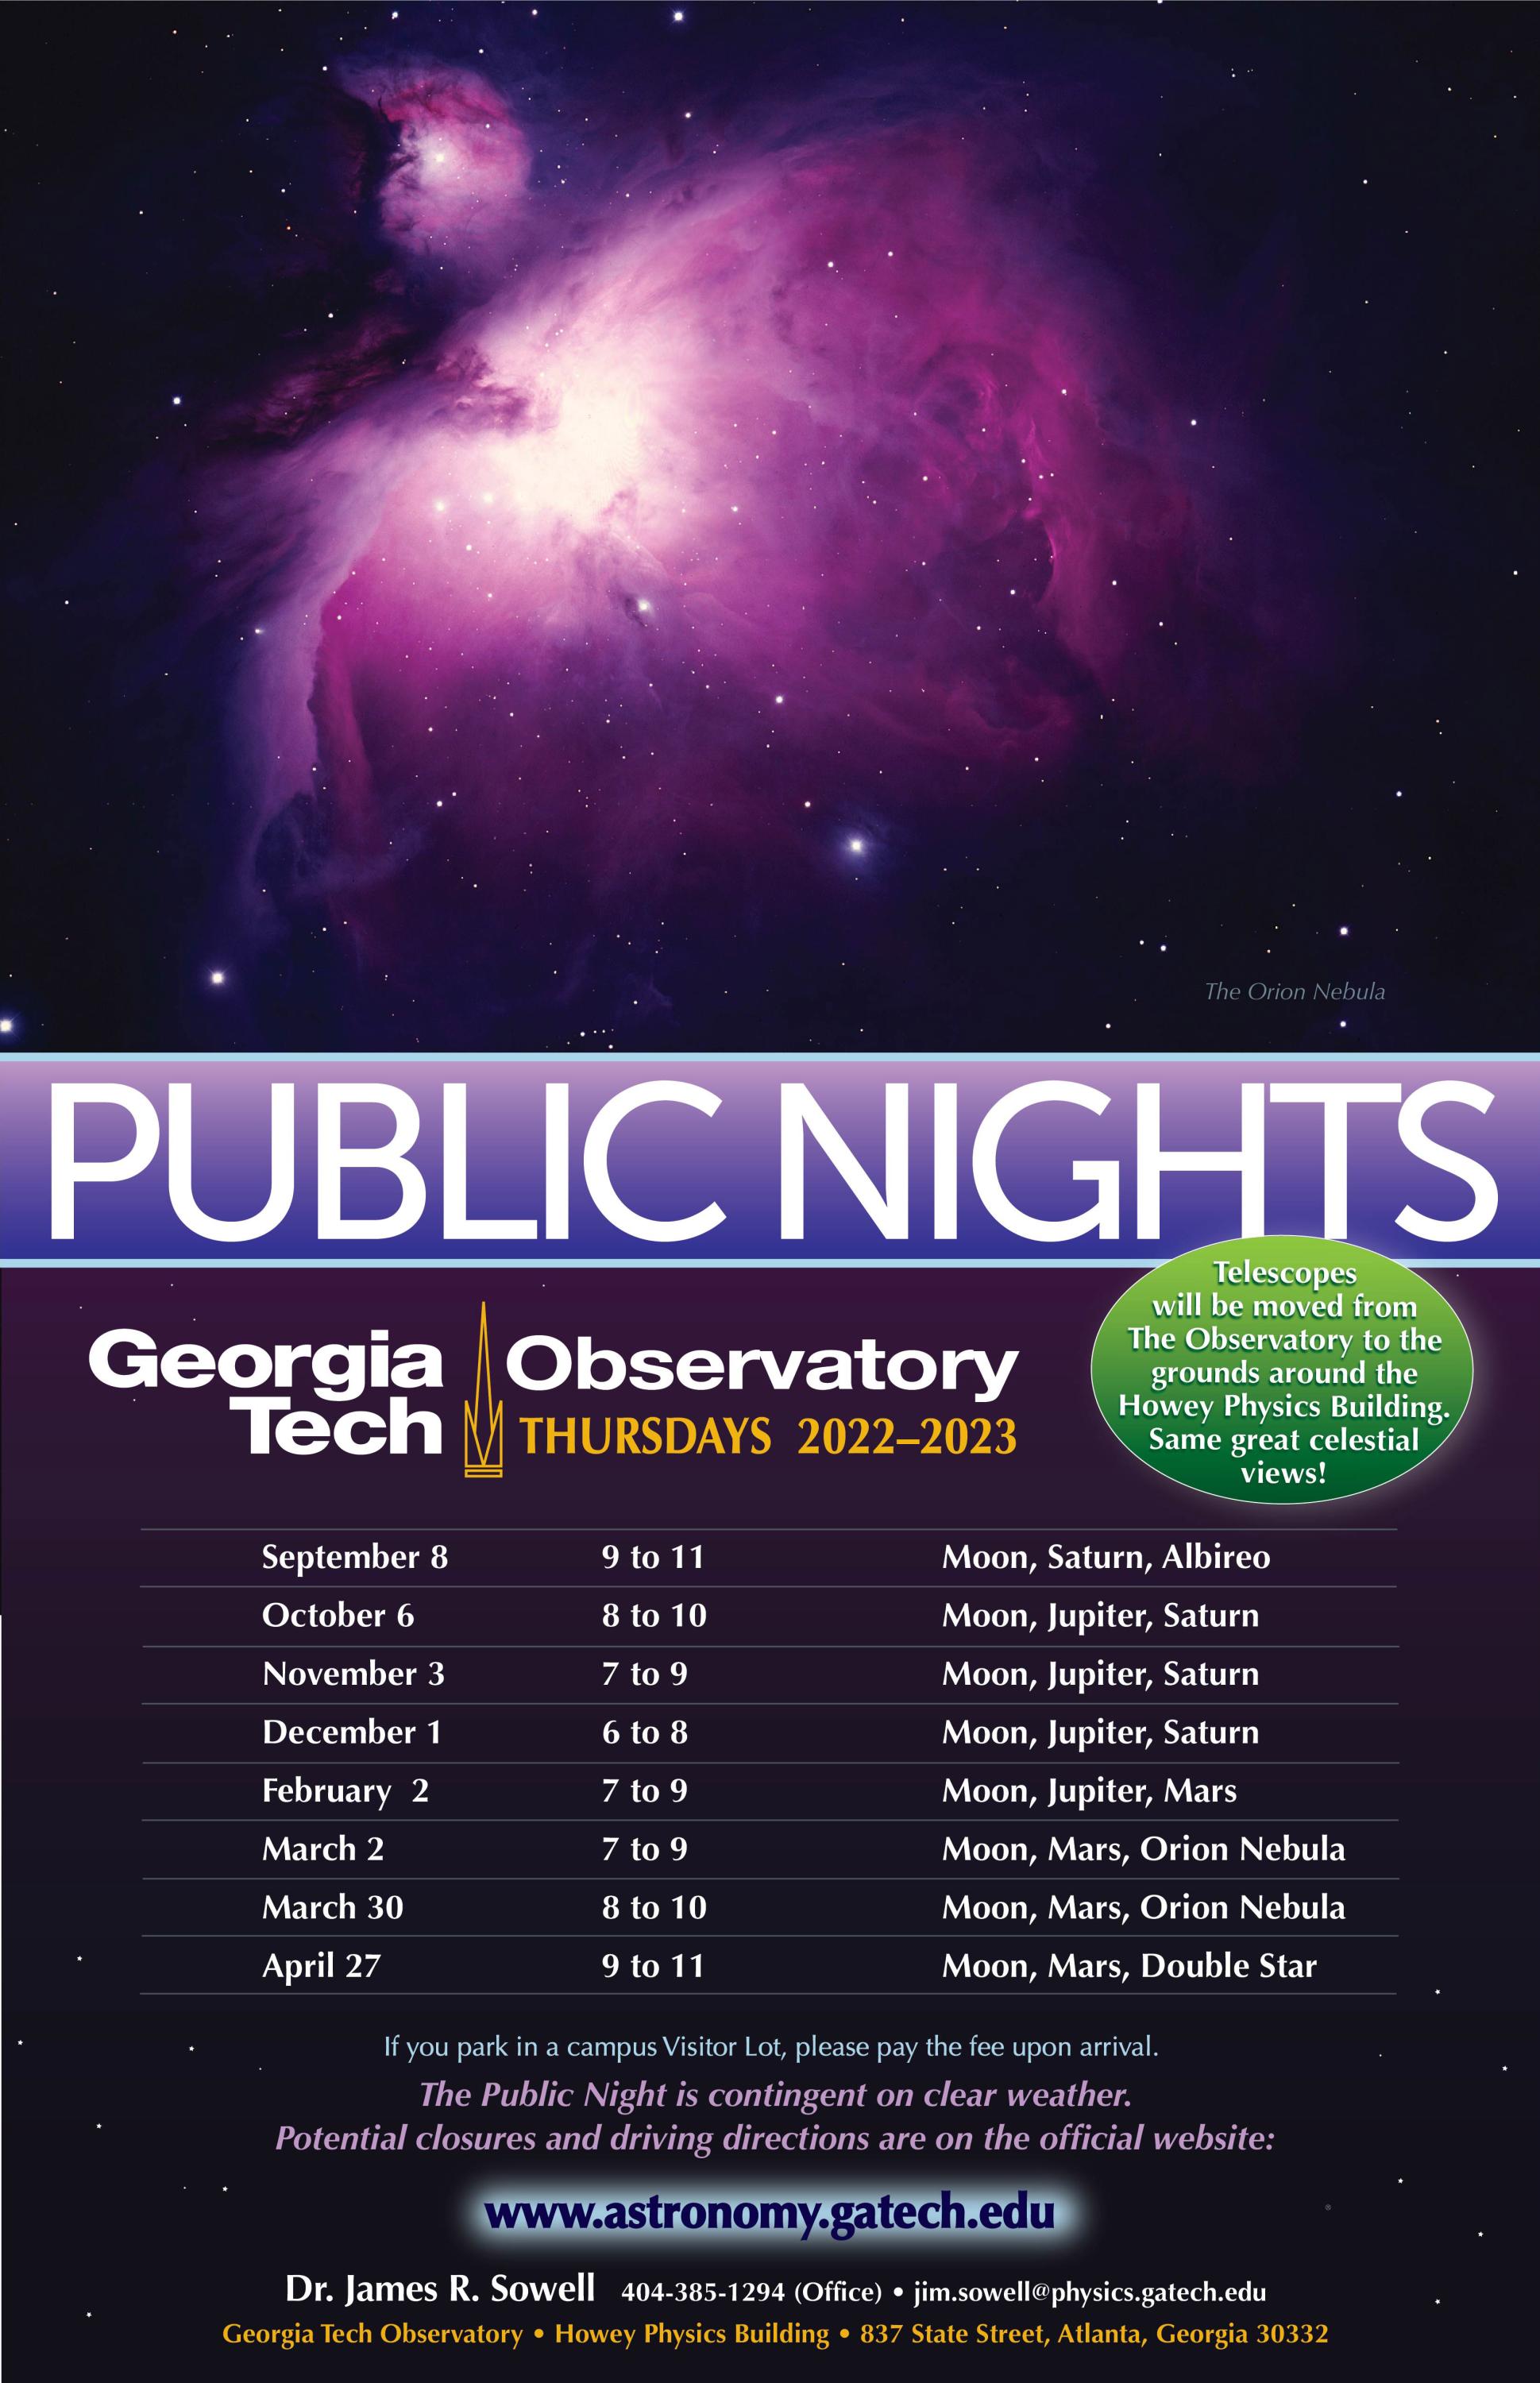 Public Nights at the Georgia Tech Observatory: Fall 2022 and Spring 2023